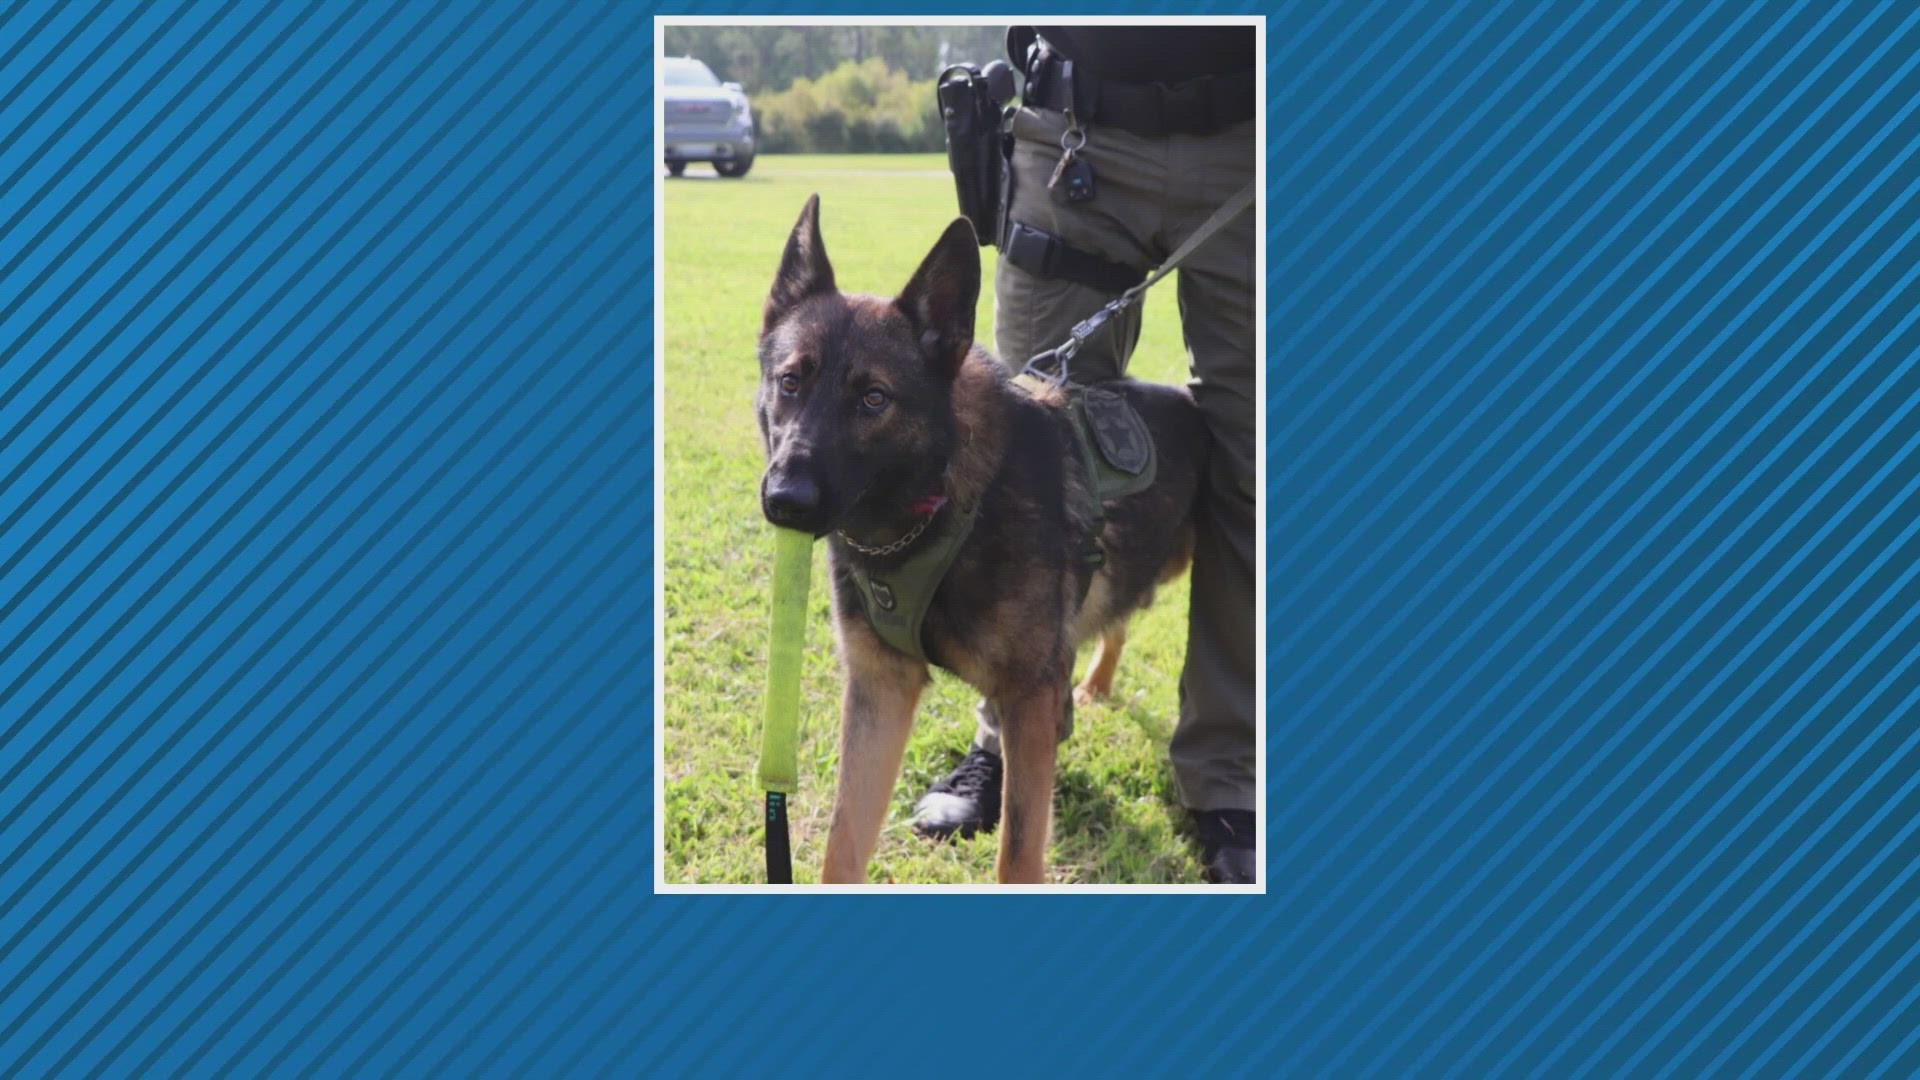 The K-9 named "Chaos" chased after a suspect who fled a traffic stop. Deputies say the suspect had out of county warrants and drugs in his possession.